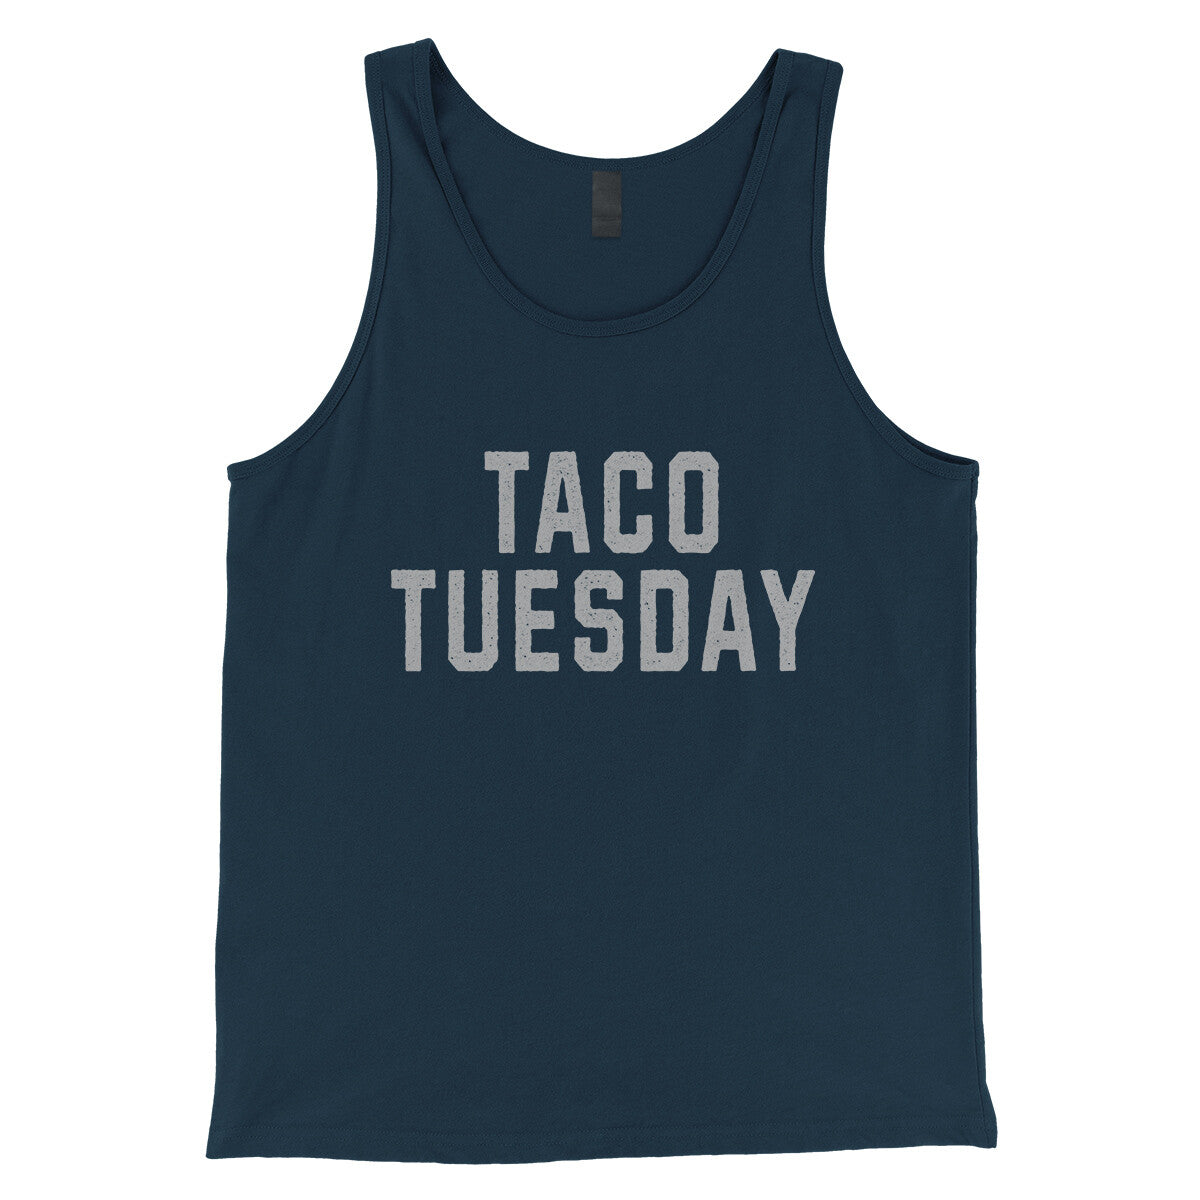 Taco Tuesday in Navy Color